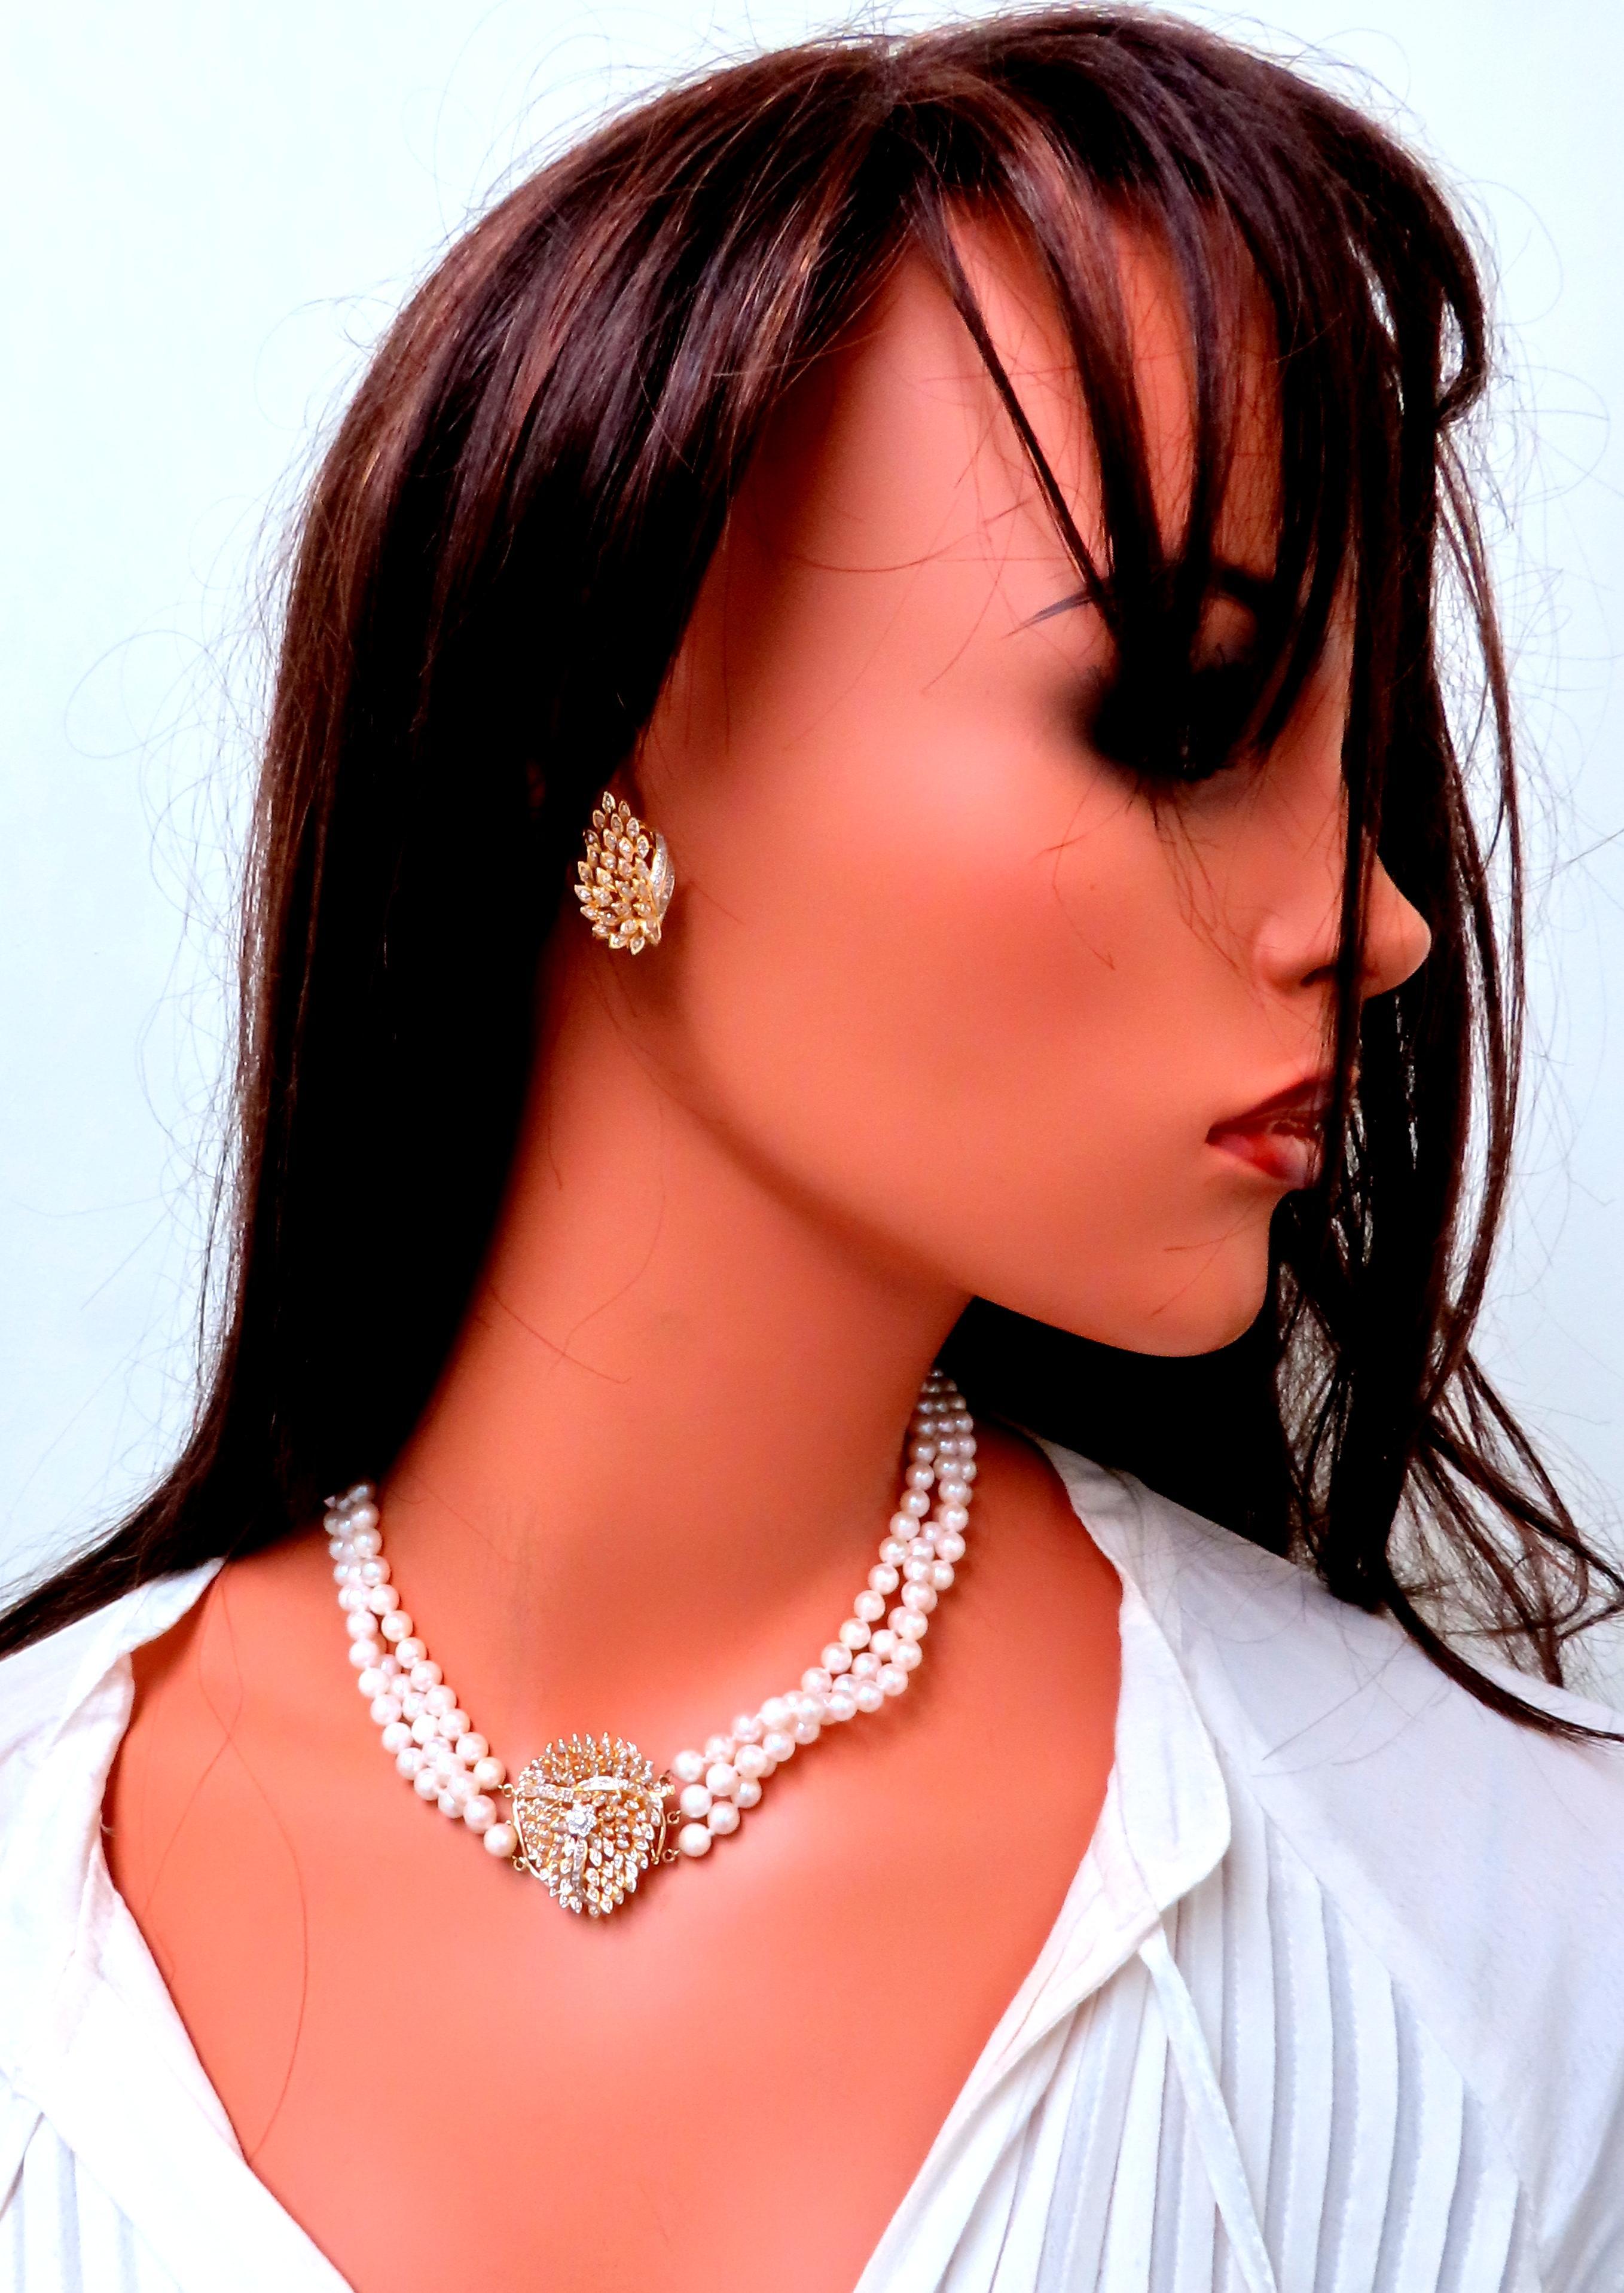 Angel Wings Diamond Earrings & Pendant Pearl Strand Necklace 14kt Gold 12386 For Sale 2